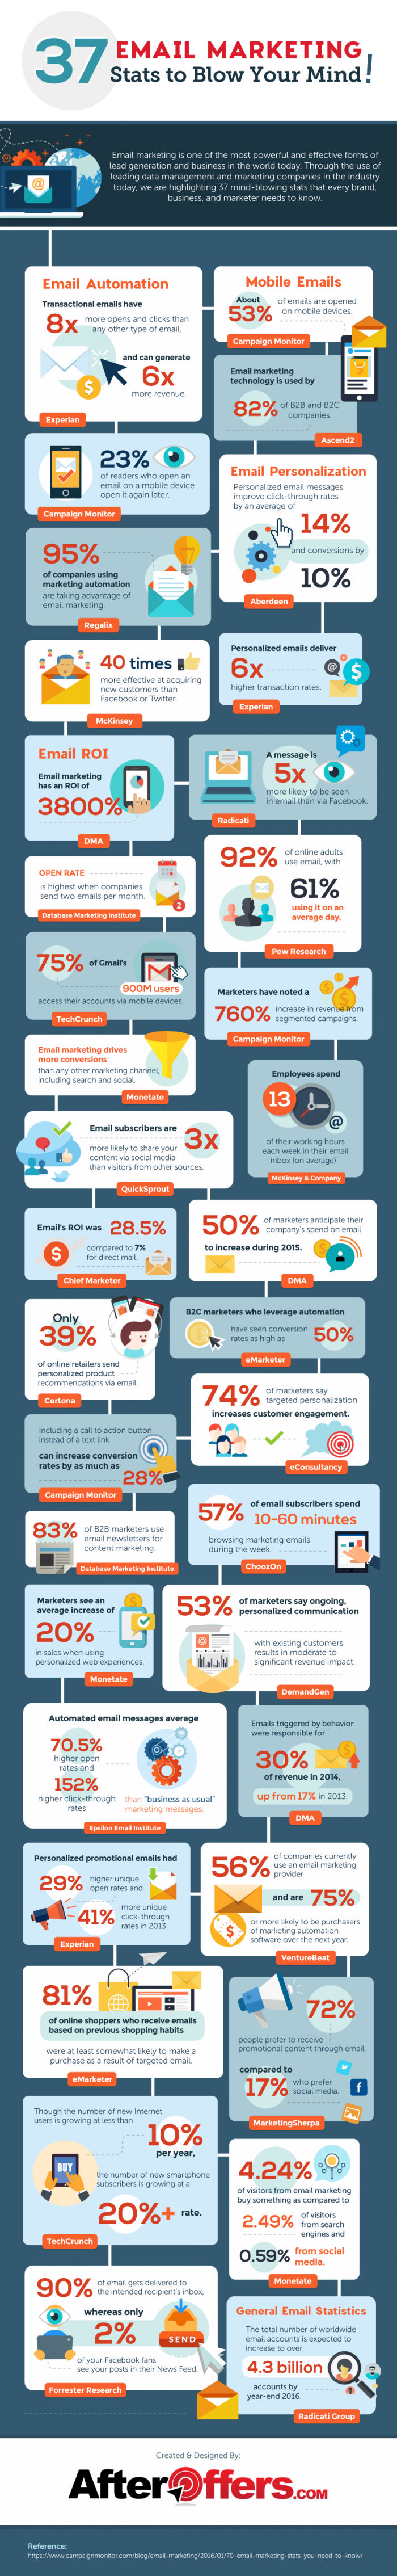 infographie-emailing-37-statistiques